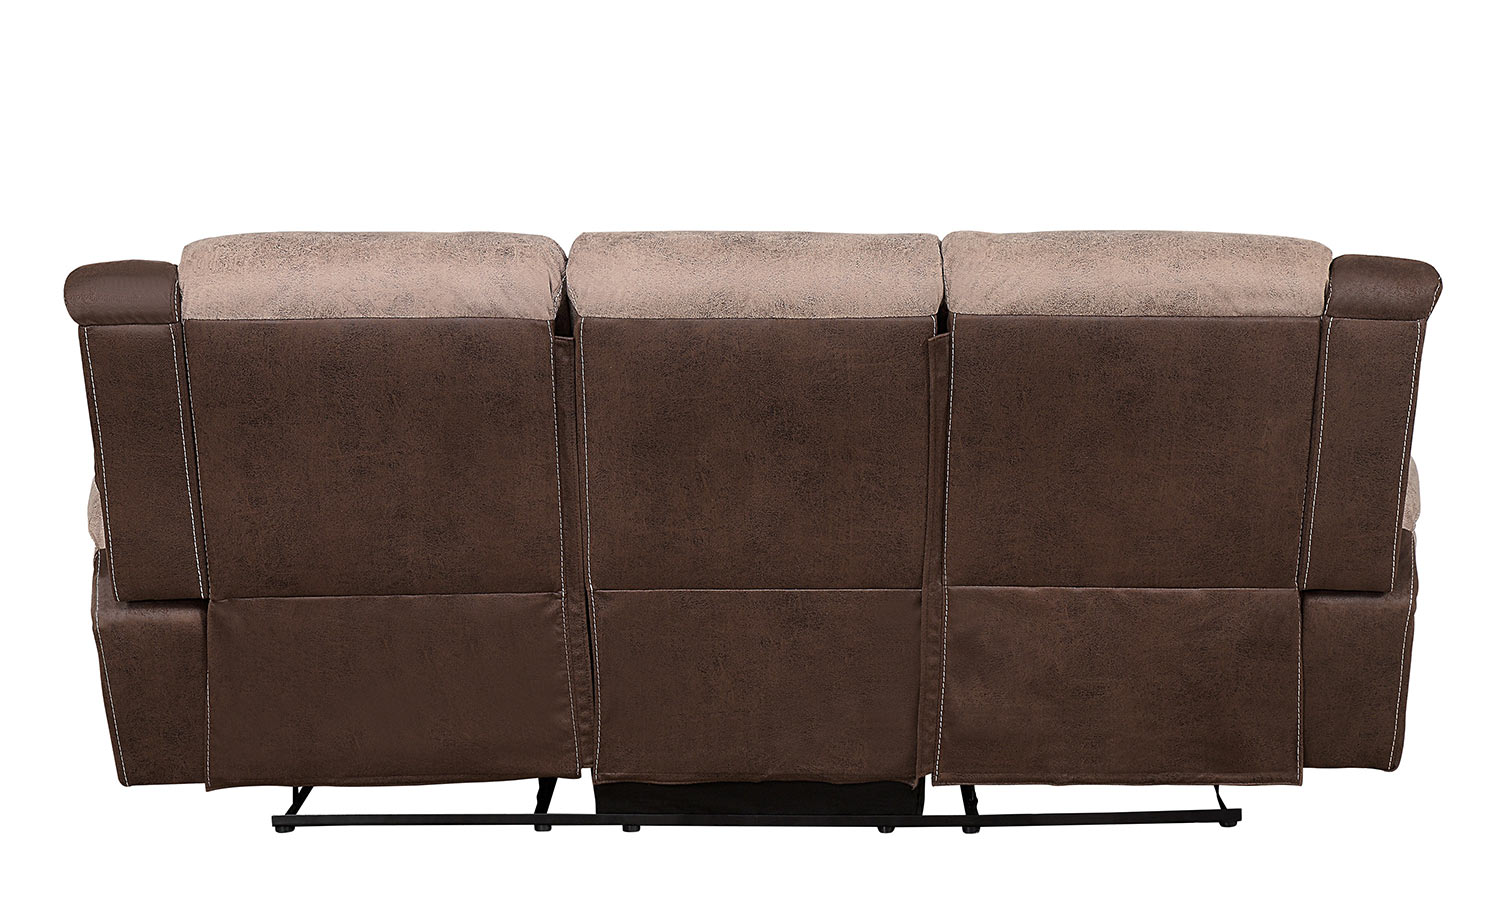 Homelegance Chai Double Reclining Sofa - Brown and dark brown polished microfiber